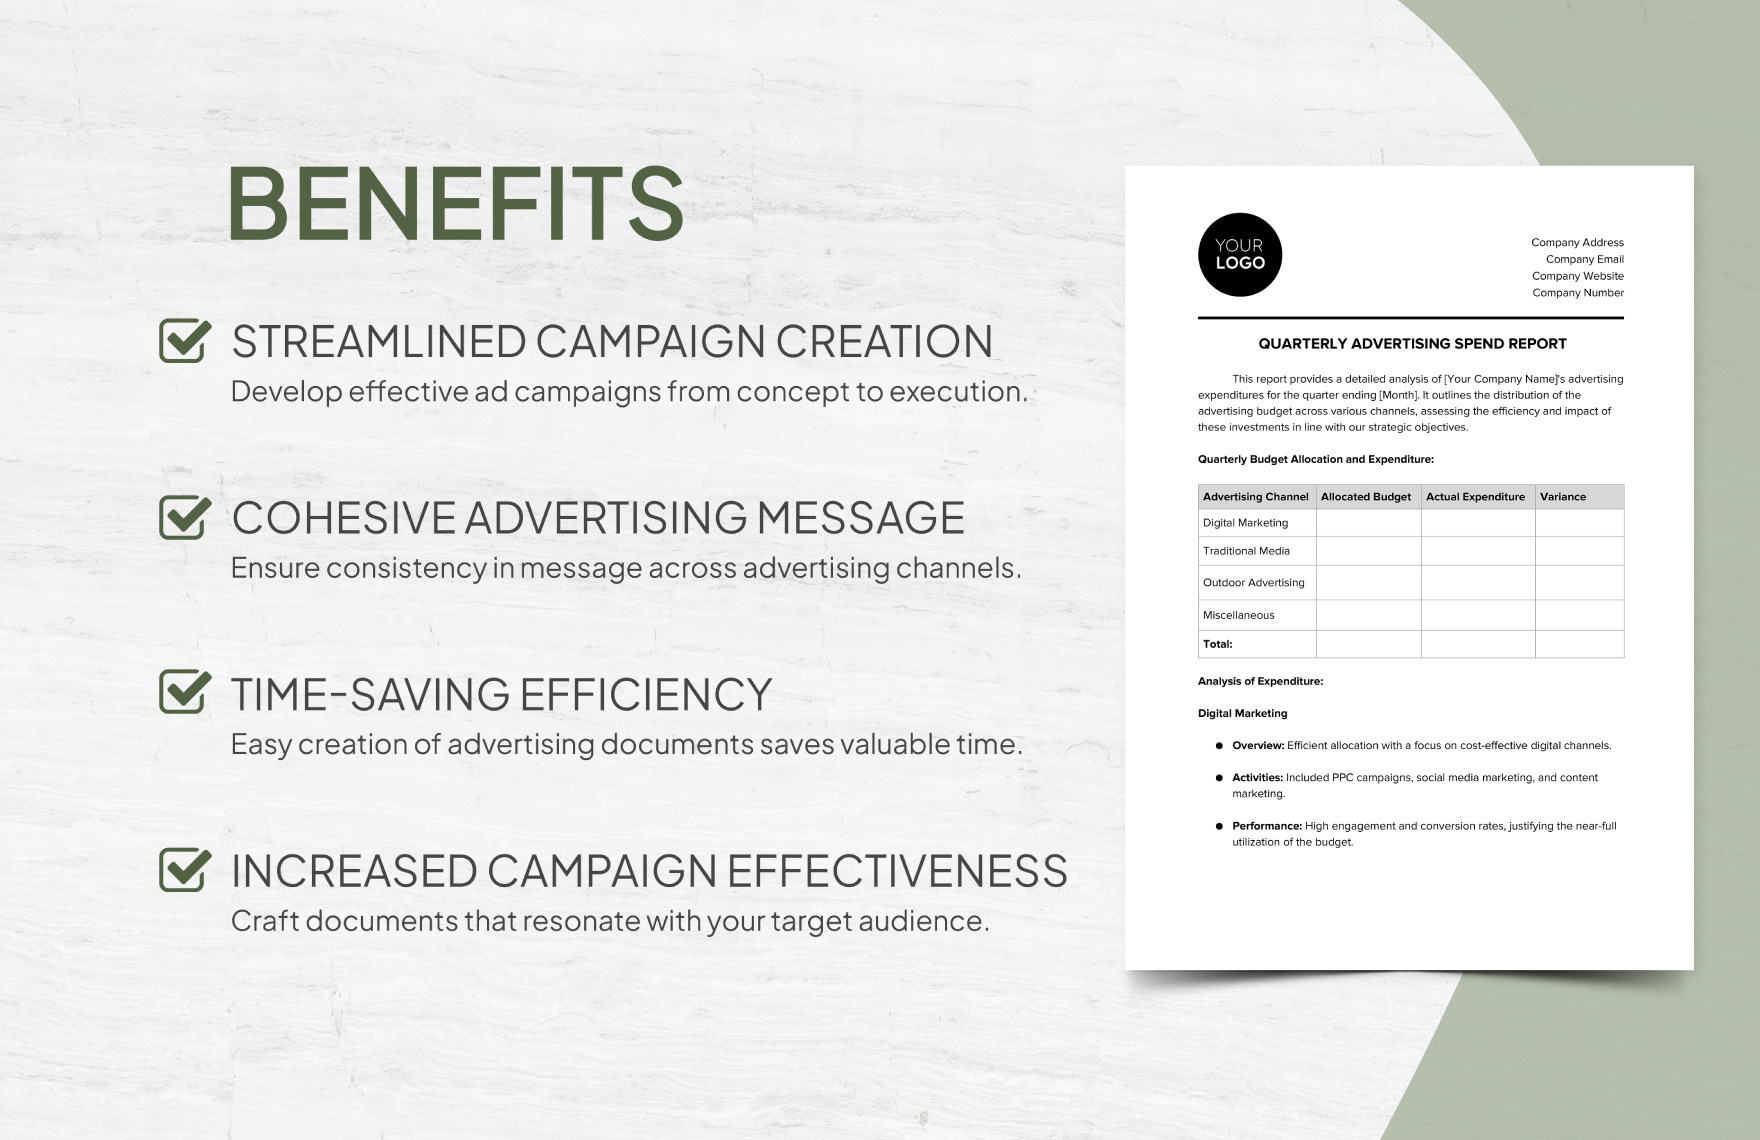 Quarterly Advertising Spend Report Template